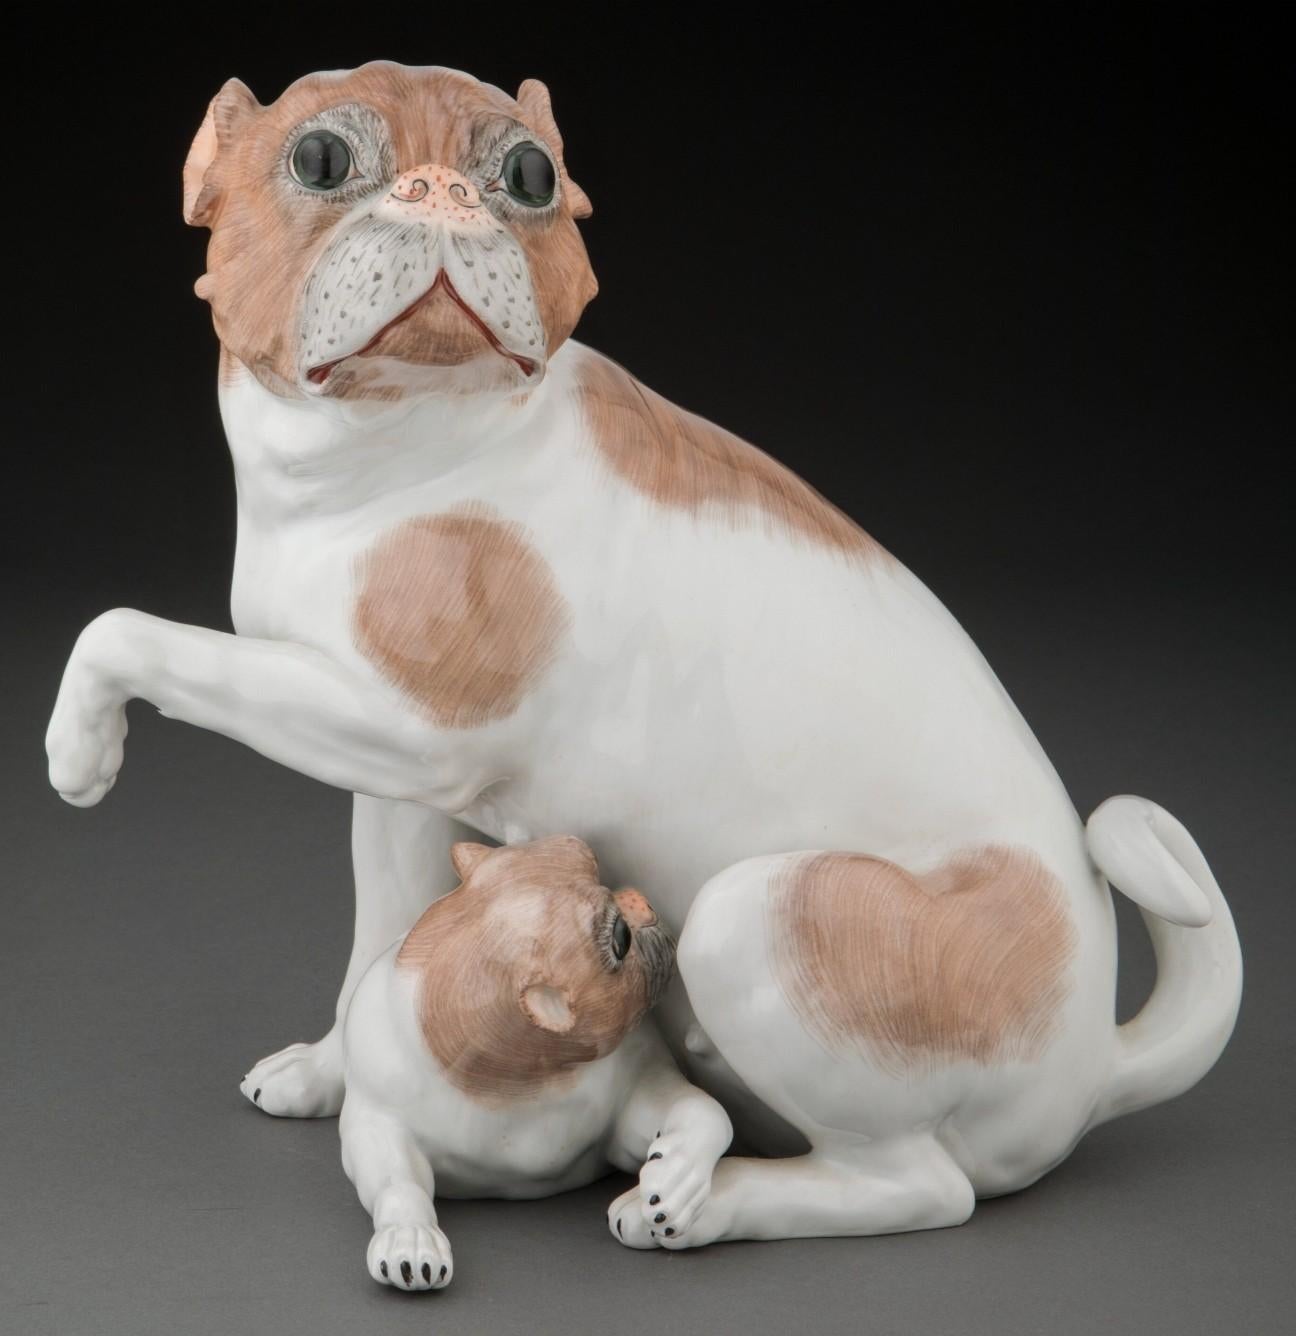 A lovely antique Dresden porcelain pug dogs figural group designed by Carl Thieme of Potschappel, Saxony, Germany. Early 20th century, exceptionally executed porcelain sculpture depicting figurine of pug mother and nursing pup. 

Marks: Signed with